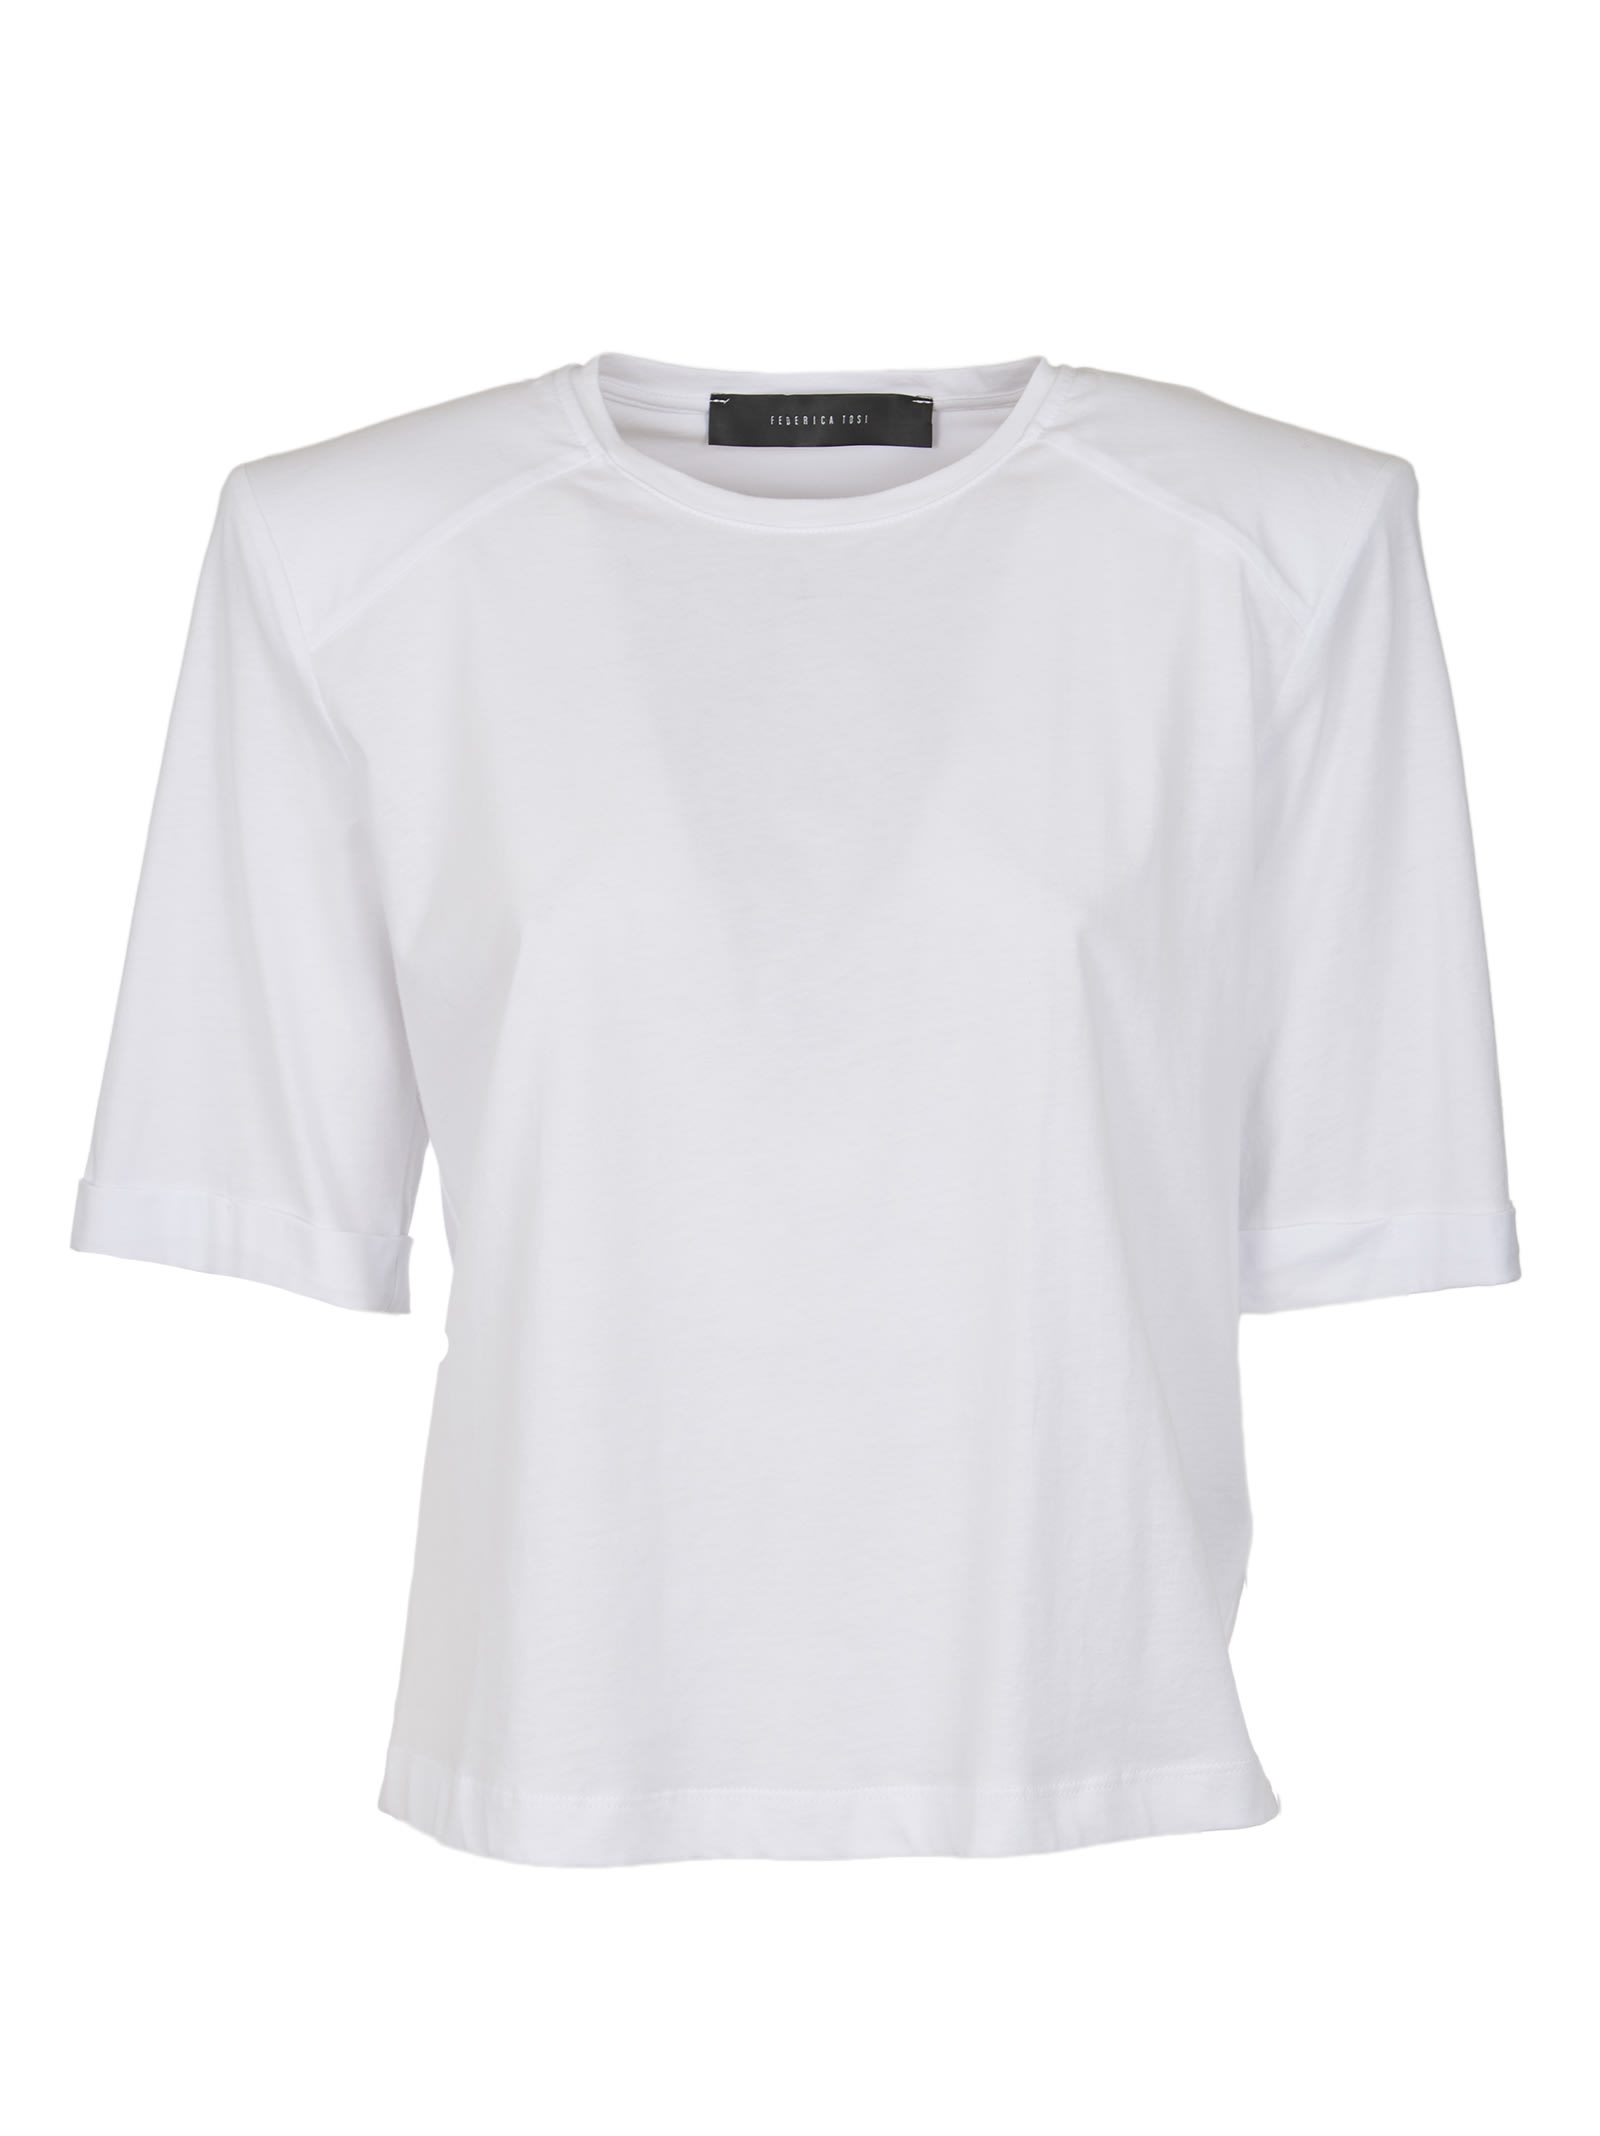 Federica Tosi Round Neck Cropped T-shirt